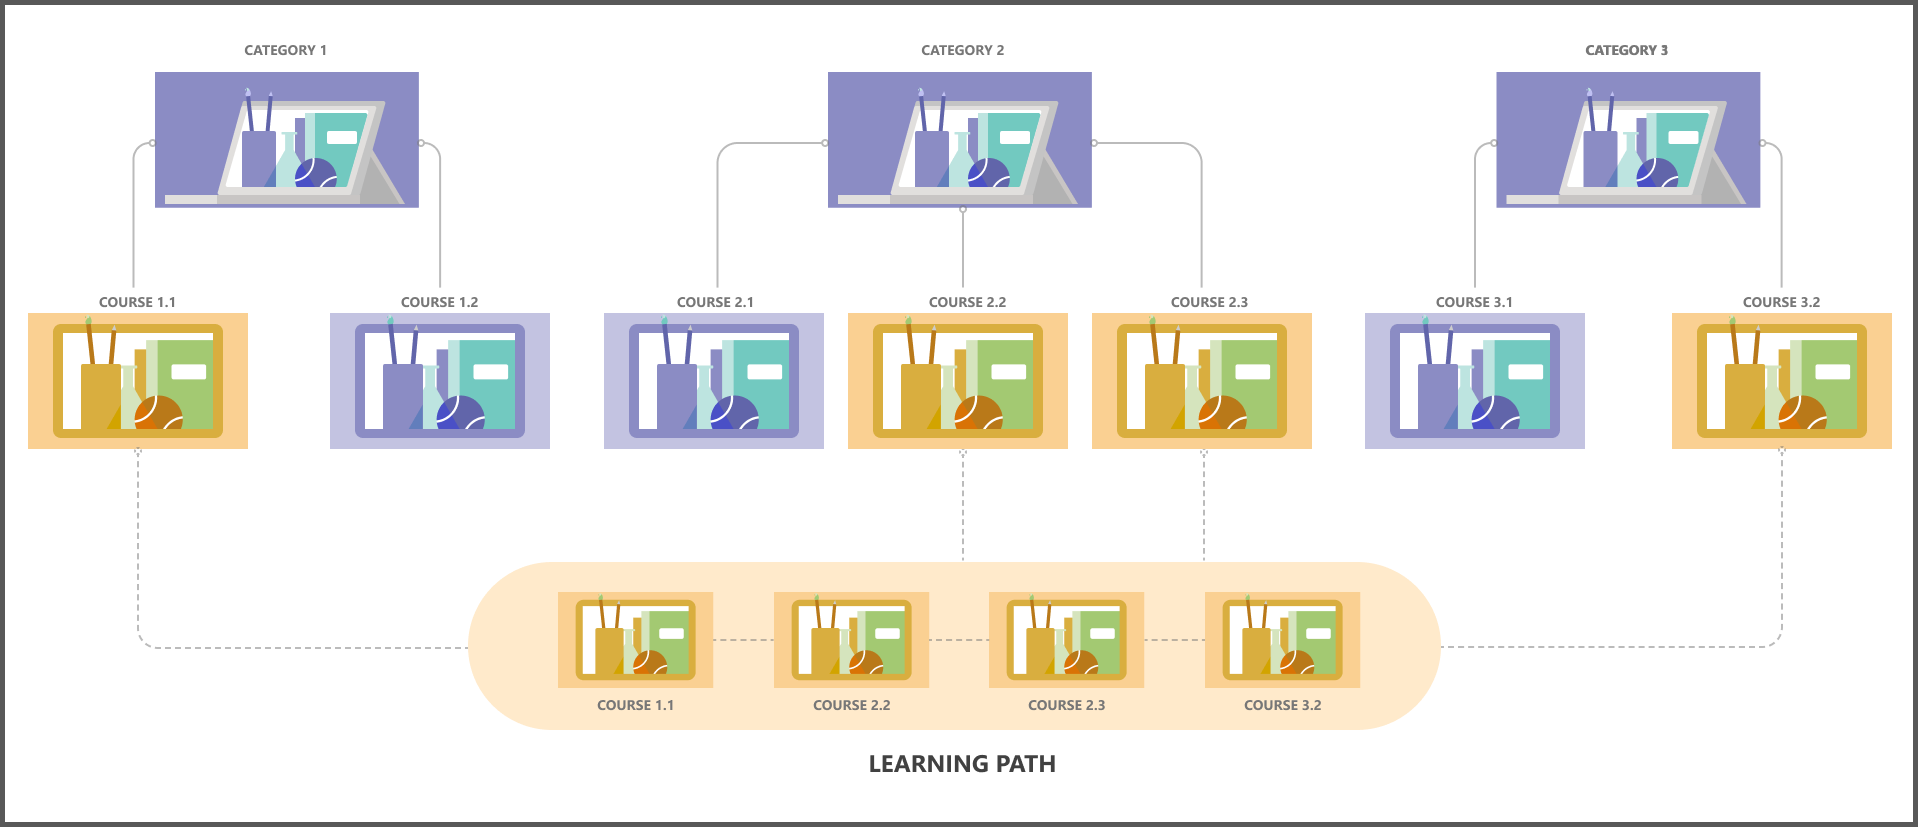 Course Management - Learning path